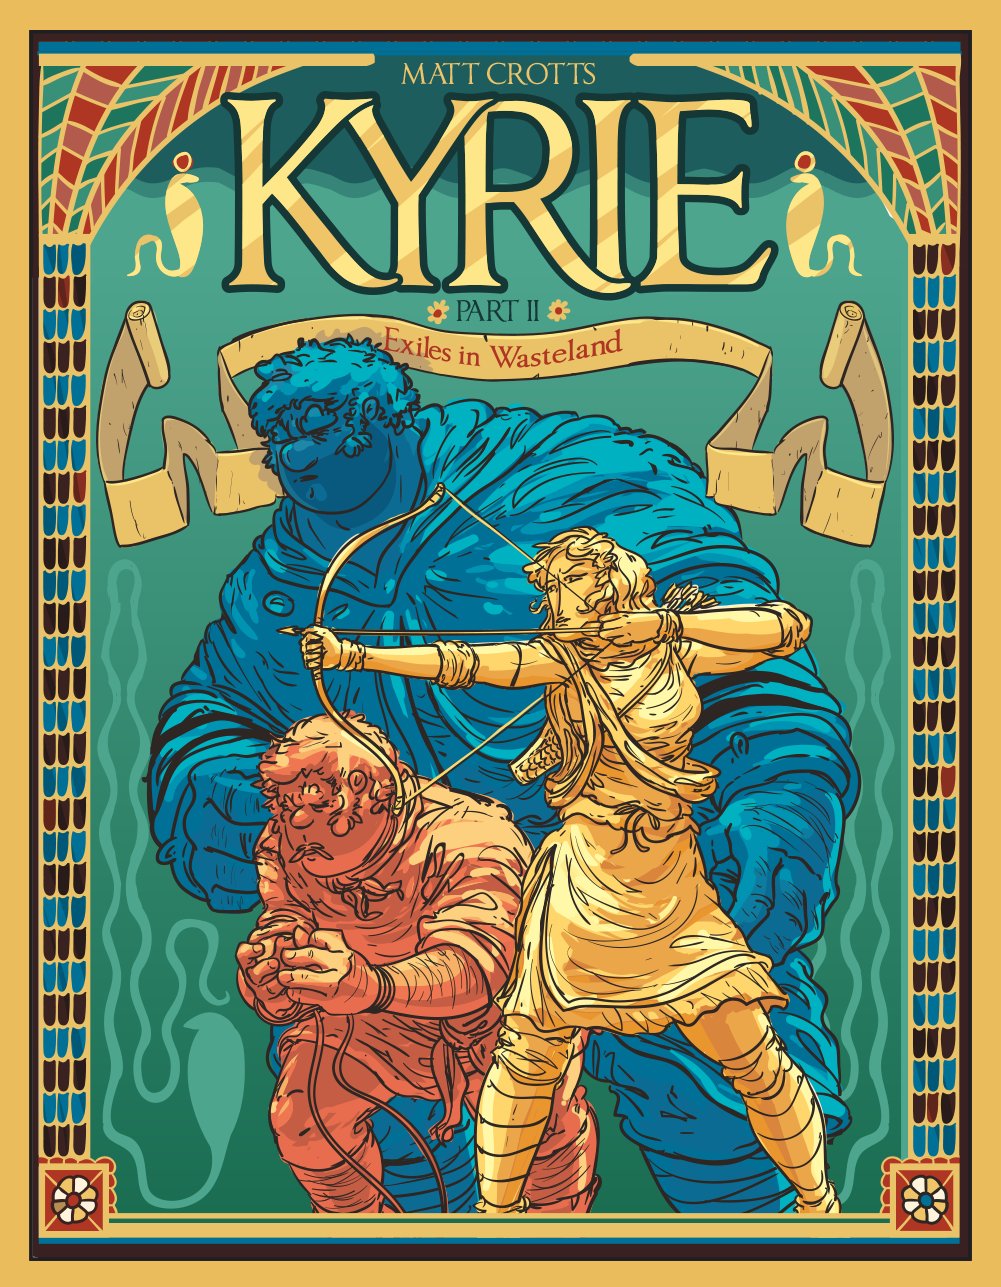 KYRIE: Exiles in Wasteland!